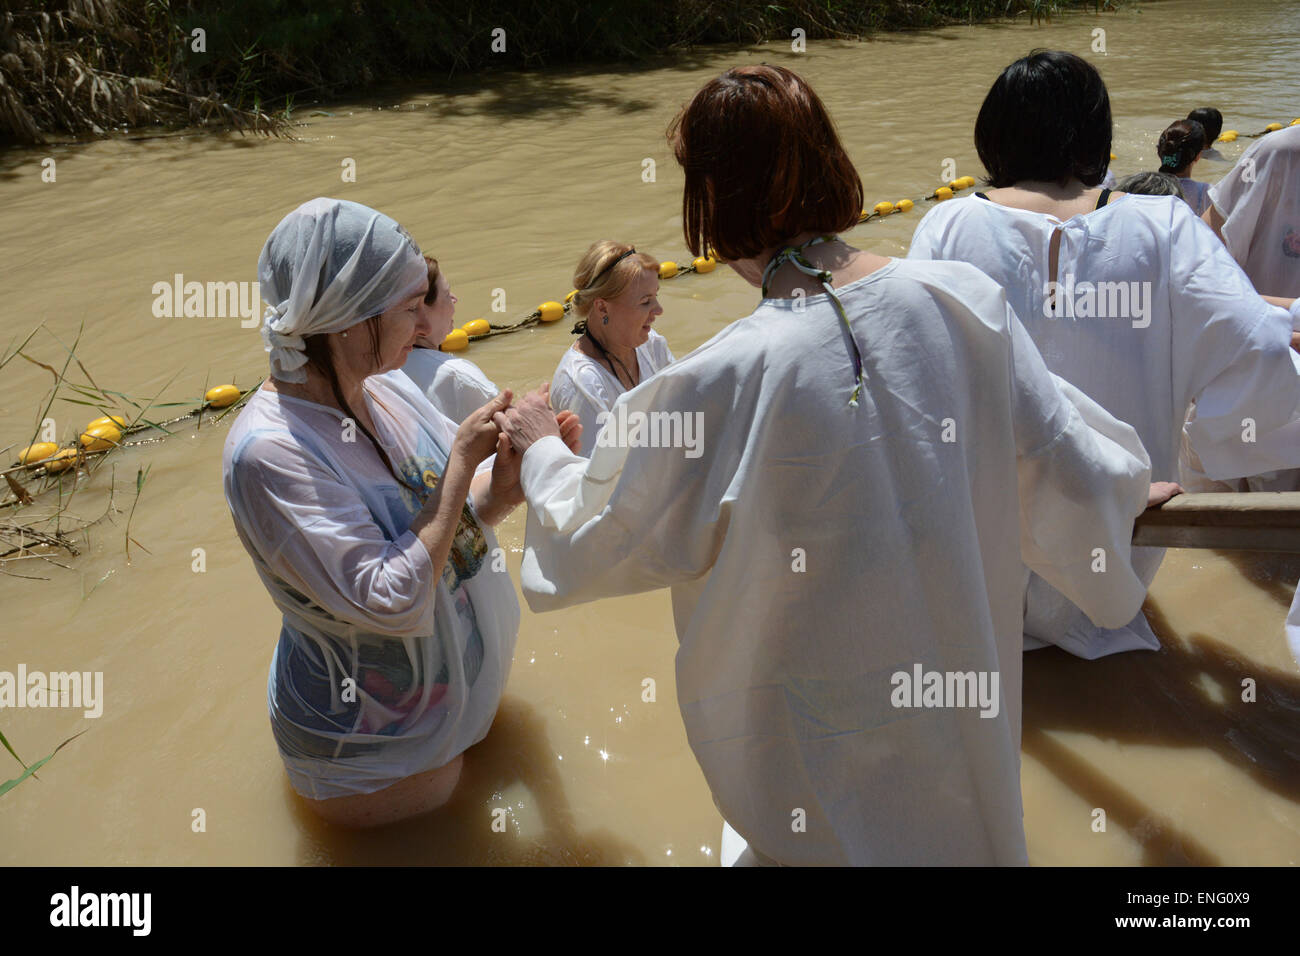 A group of Russian pilgrims at the site of Jesus baptism, on the banks of the Jordan River, Israel. (Photo by Laura Chiesa / Pacific Press) Stock Photo